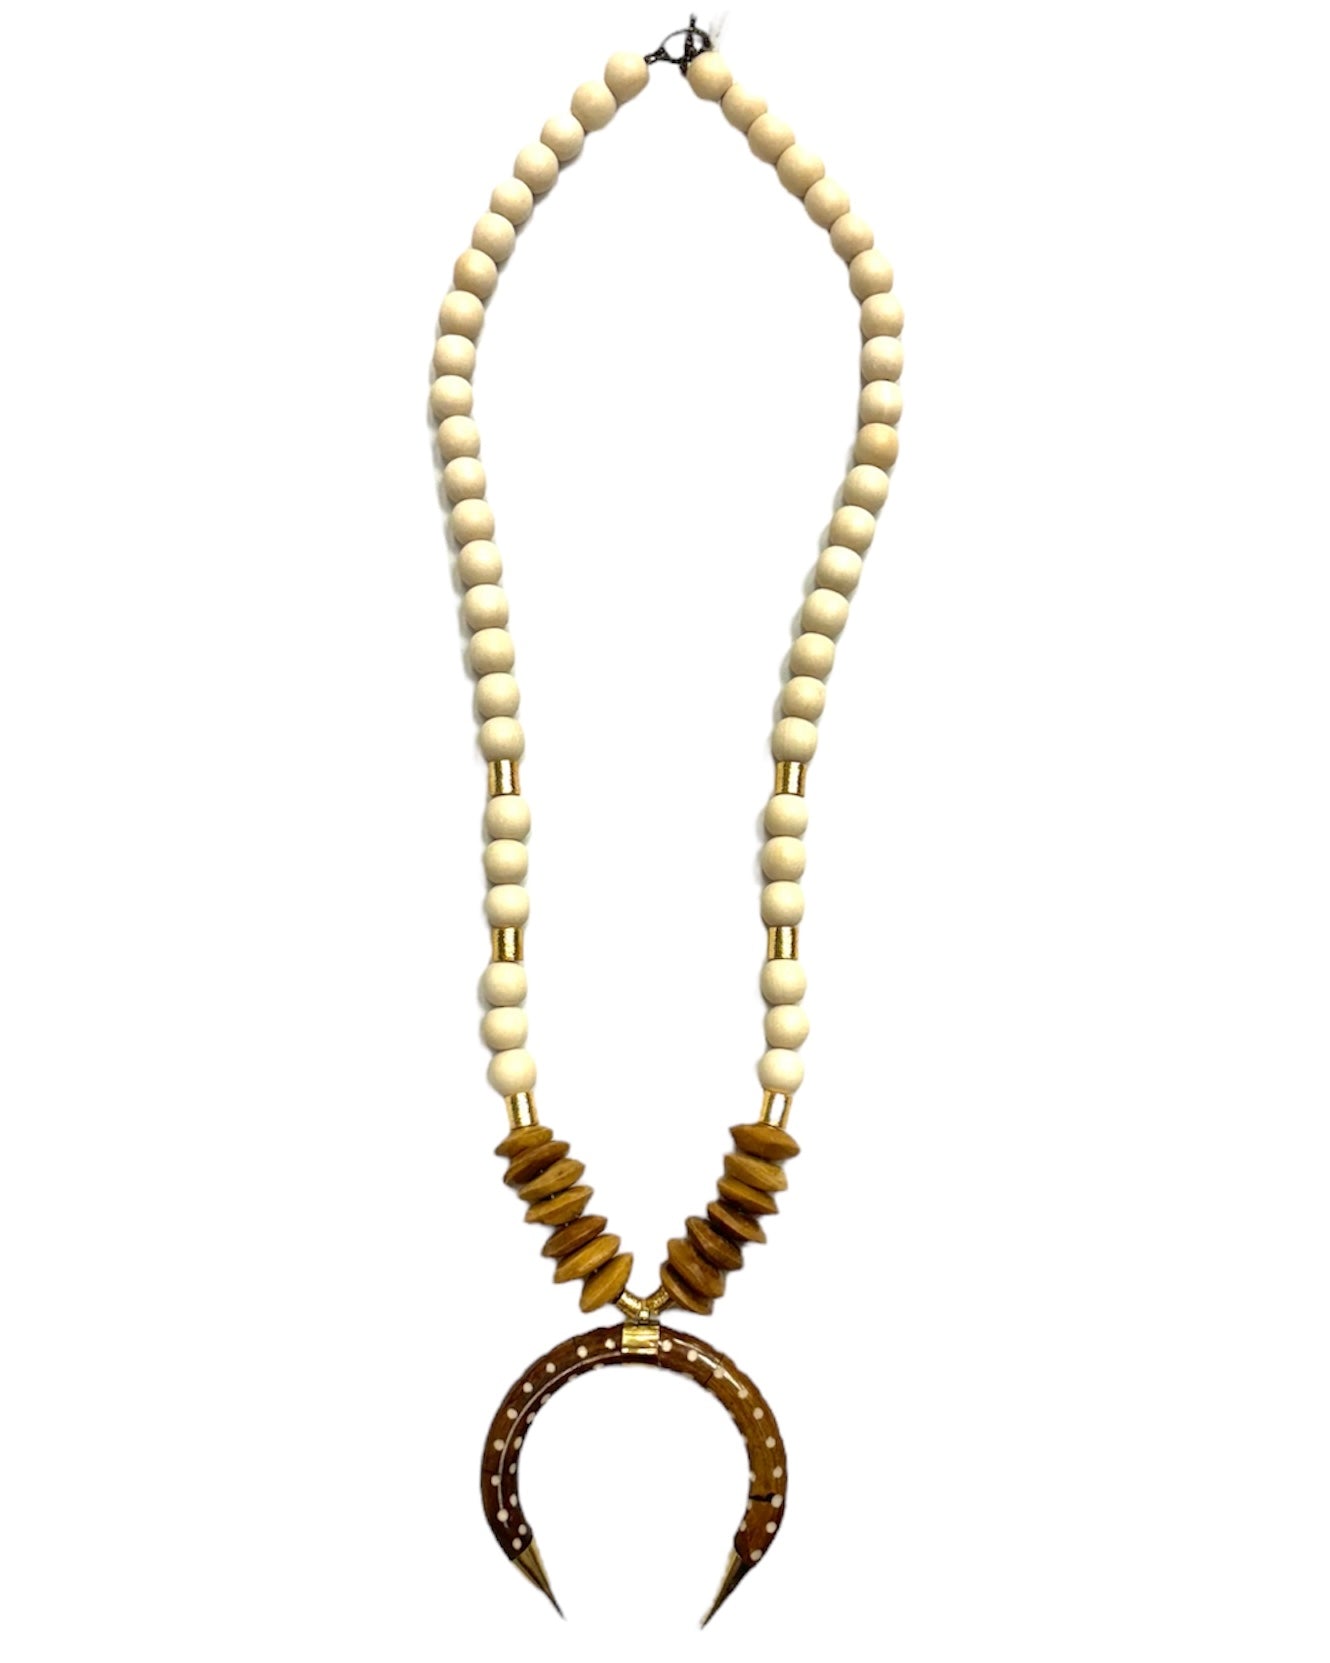 WHITE WOOD BONE BEAD NECKLACE - Brown